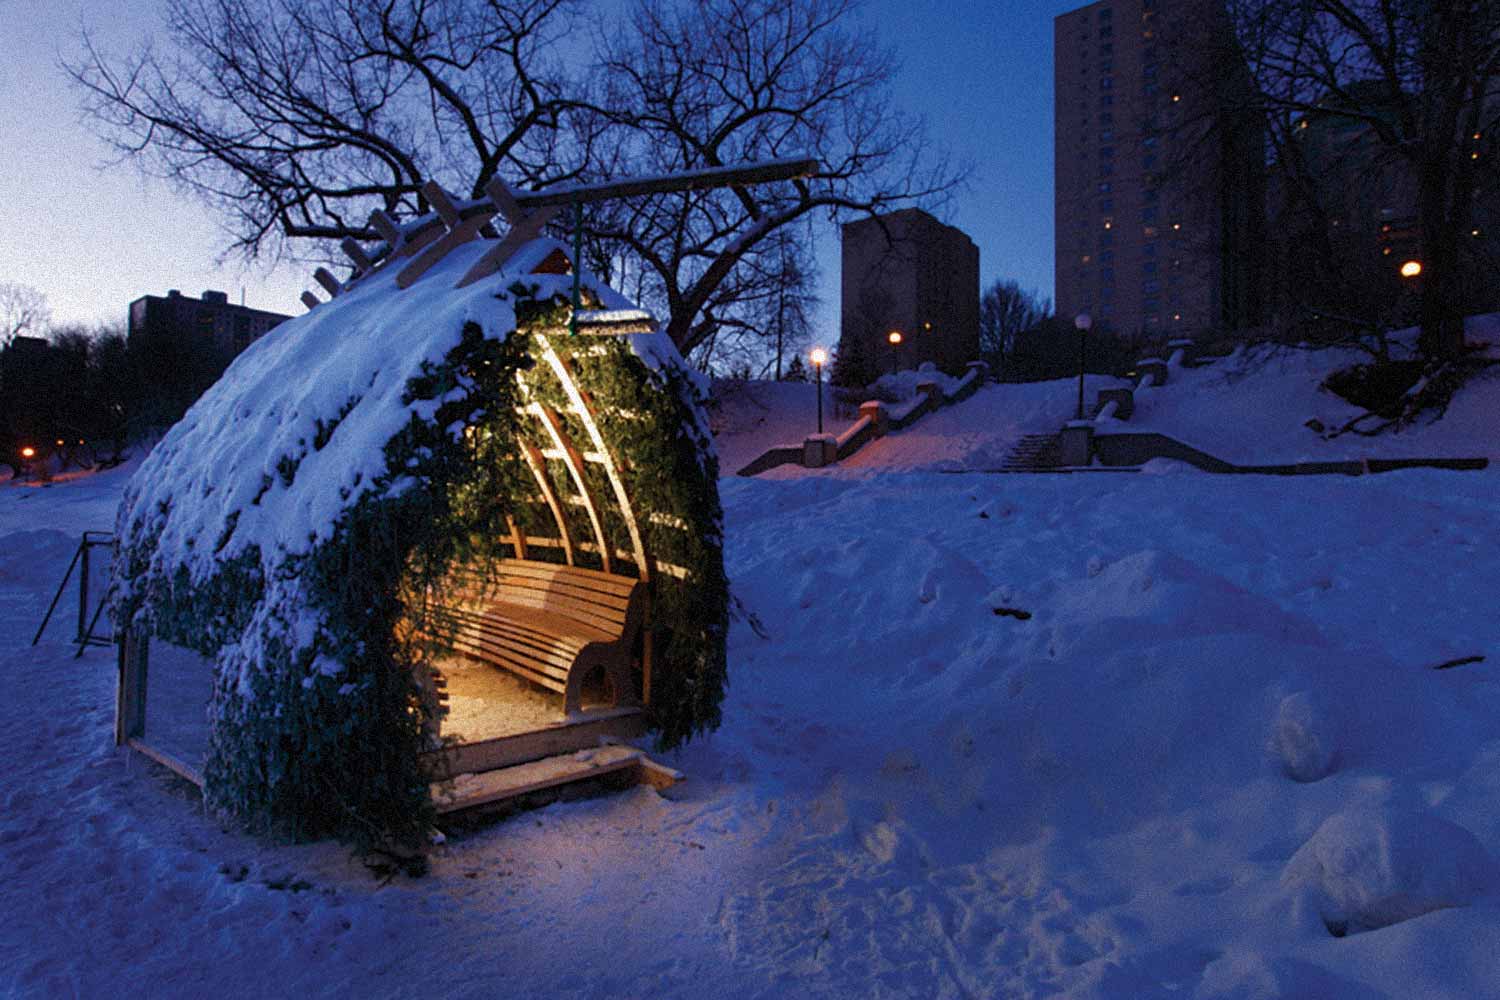 A small hut made of wood is lit up at night on the river trail. Its roof is covered in fir tree branches.